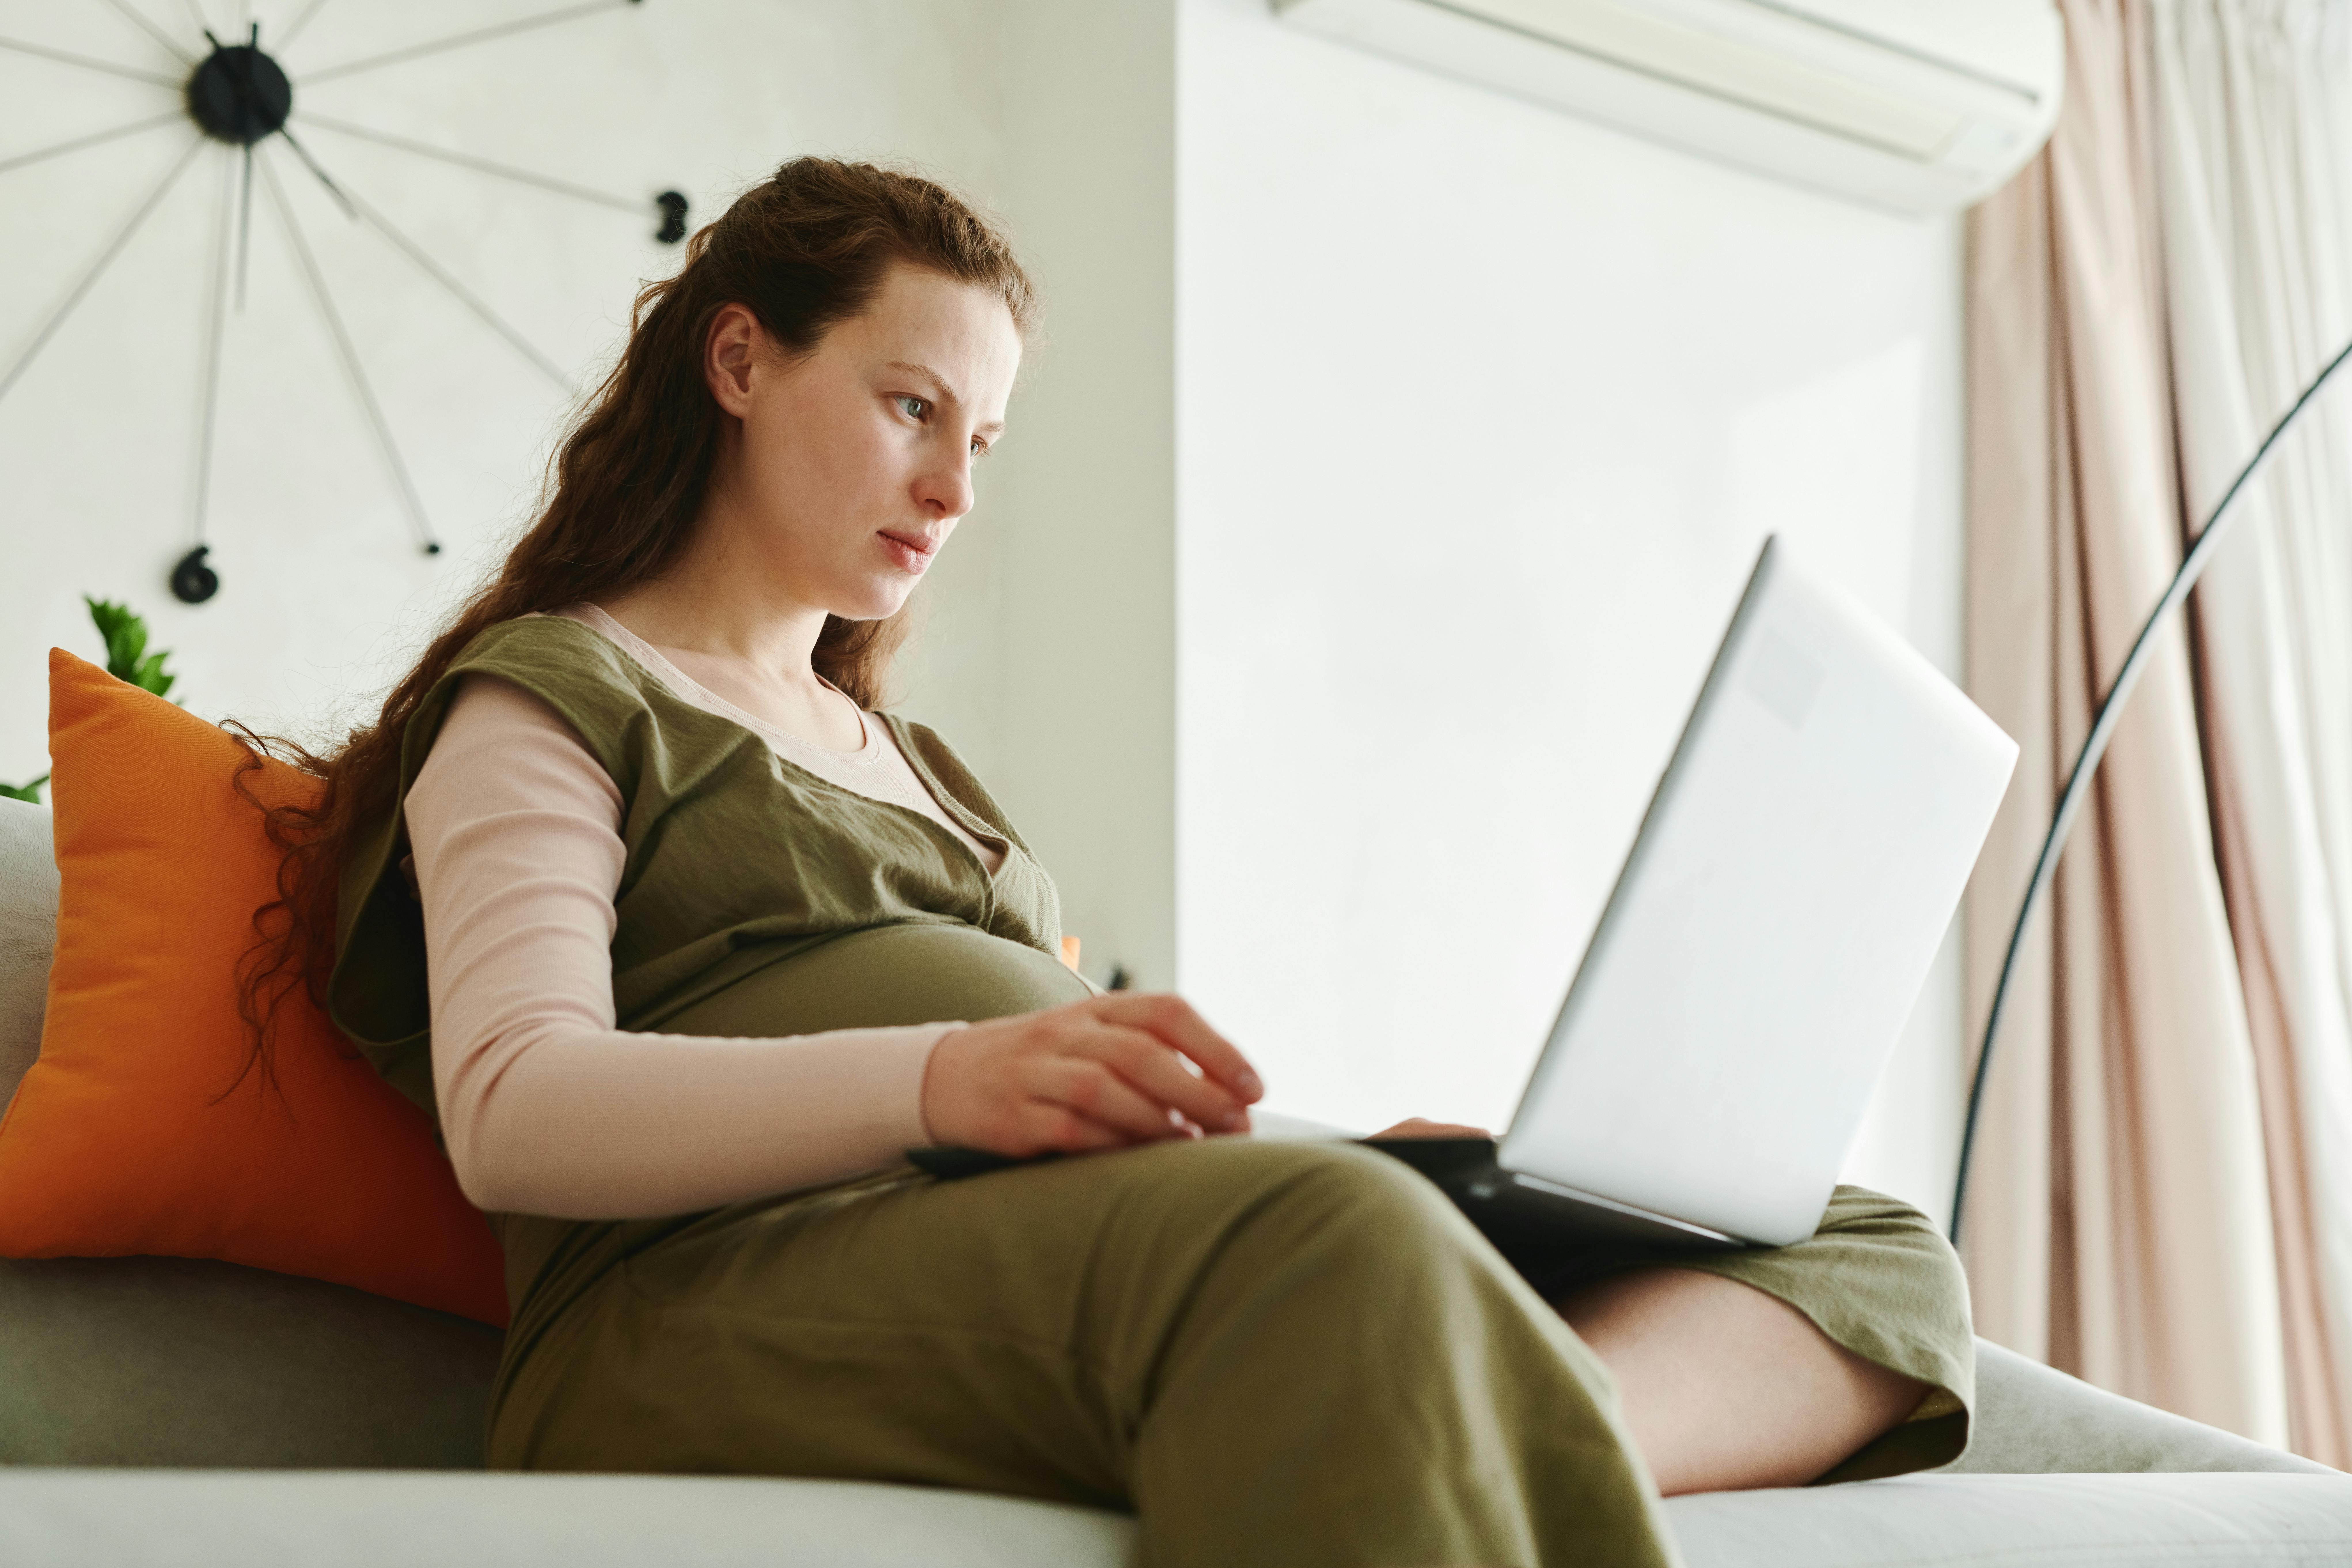 A pregnant woman working on a laptop | Source: Pexels